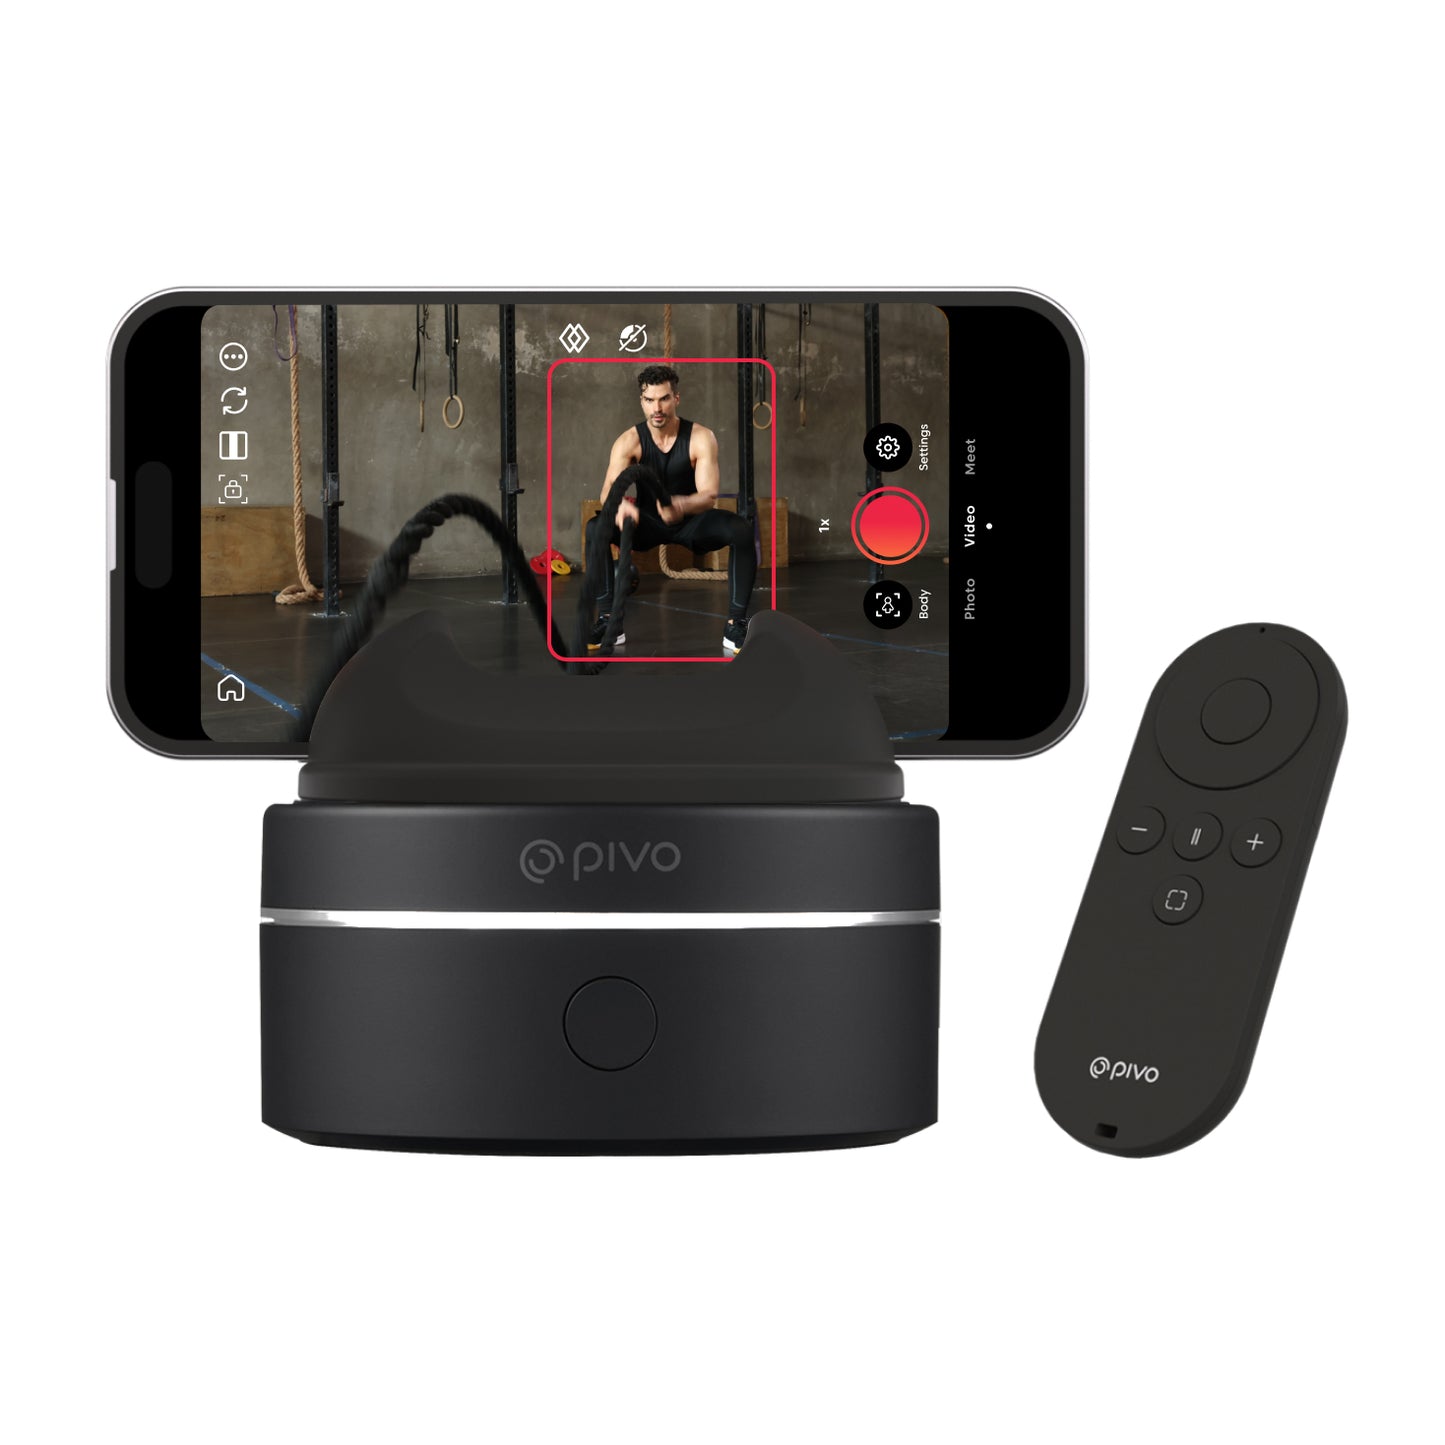 Auto Face Tracking Tripod for iPhone and Android, 360° Rotation, Content  Creator Essentials, Vlogging, Streaming, Portable, Rechargeable 